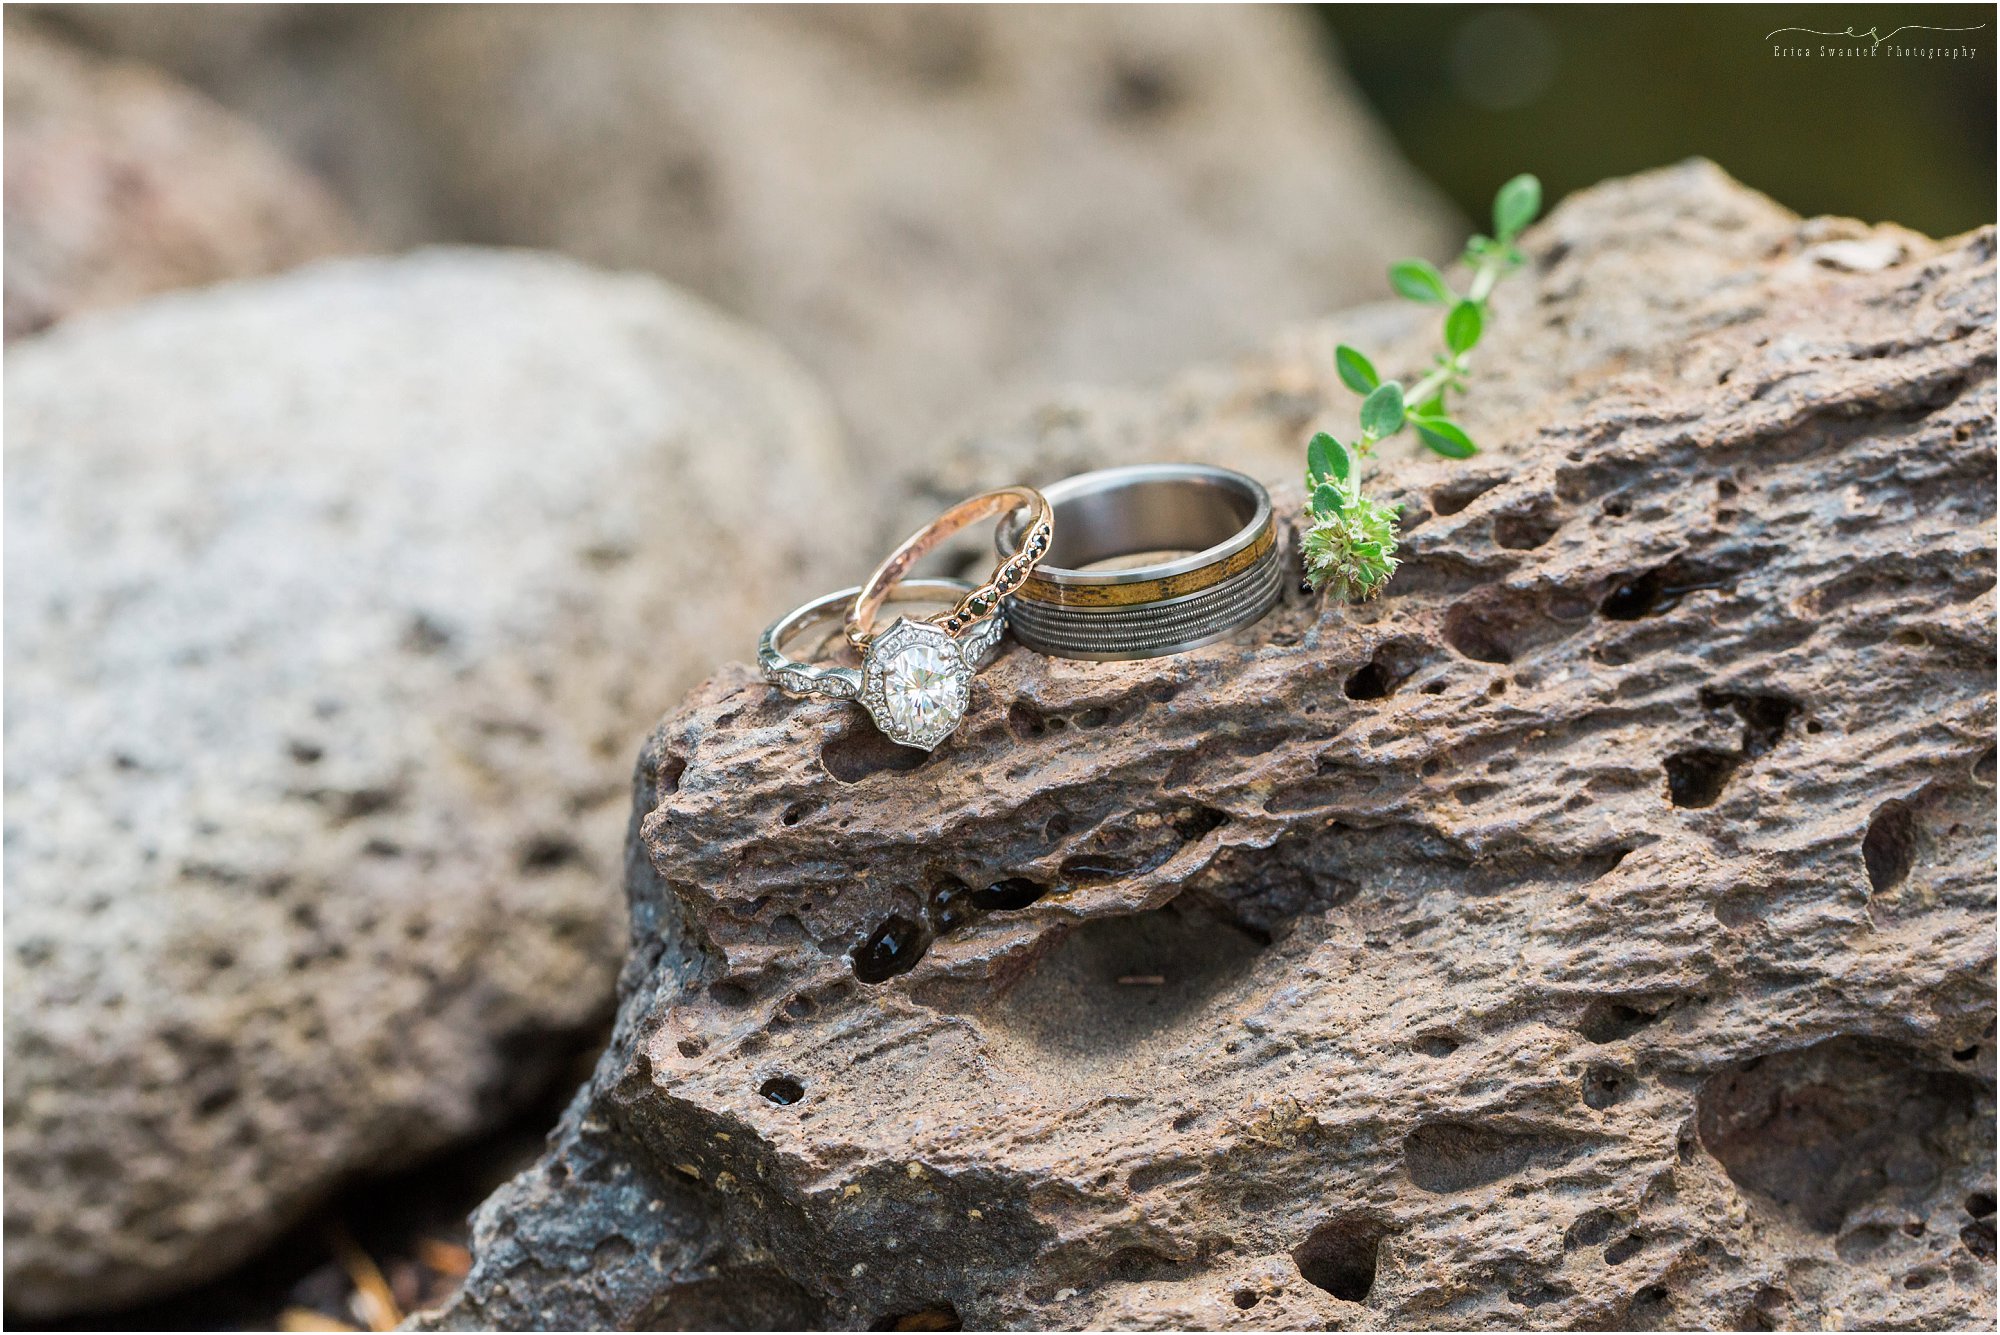 Gorgeous handmade wedding bands are perfect for an intimate Oregon waterfall wedding by Bend wedding photographer Erica Swantek Photography.